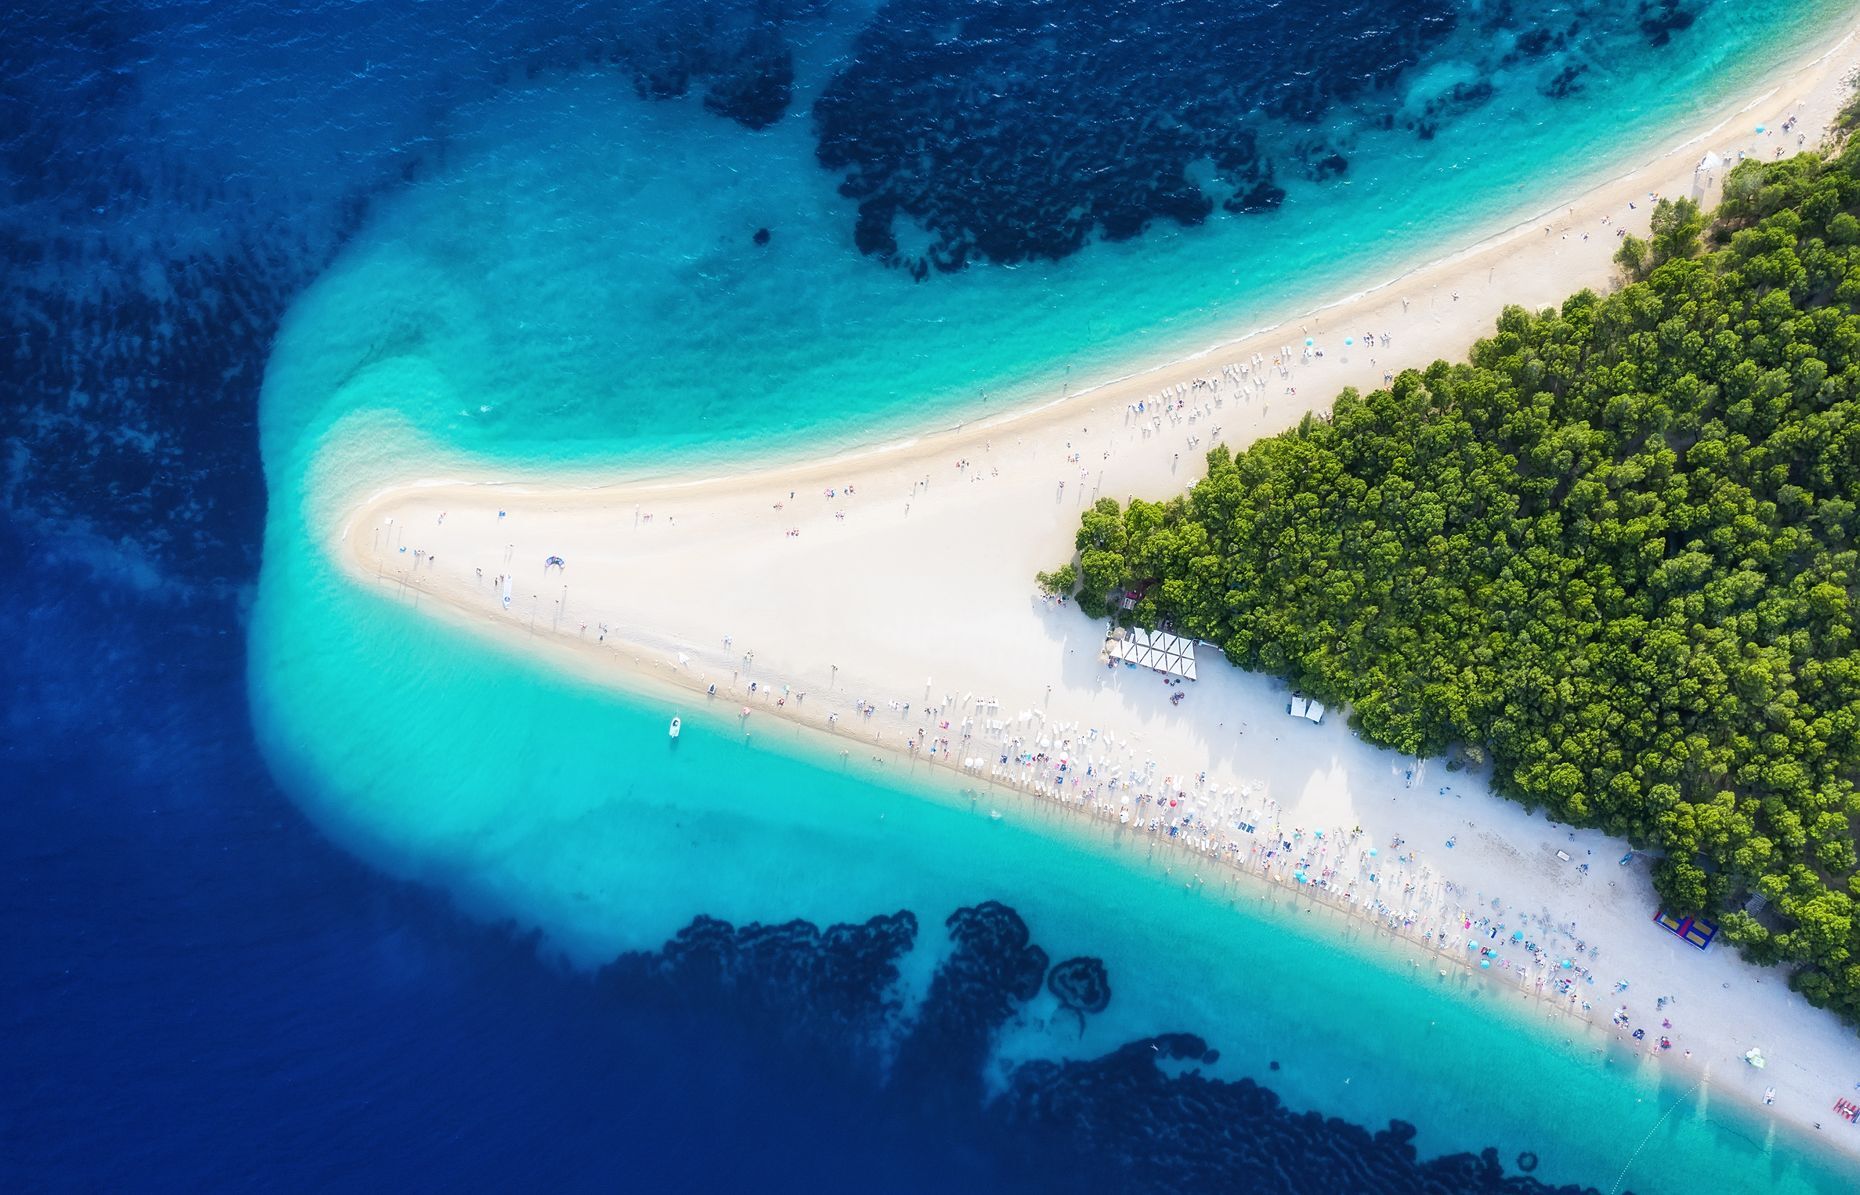 <p>Head to <a href="https://www.visitbrac.com/" class="CMY_Link CMY_Valid" rel="noreferrer noopener">Croatia’s Brac</a> Island to bask on the golden sands of Zlatni Rat, one of the world’s most beautiful beaches. Offering breathtaking views of the Adriatic Sea, the “Golden Horn” attracts windsurfers, surfers, and swimmers every year. The island is also home to several beautiful fishing villages, Roman ruins, and the pretty town of Milna.</p>